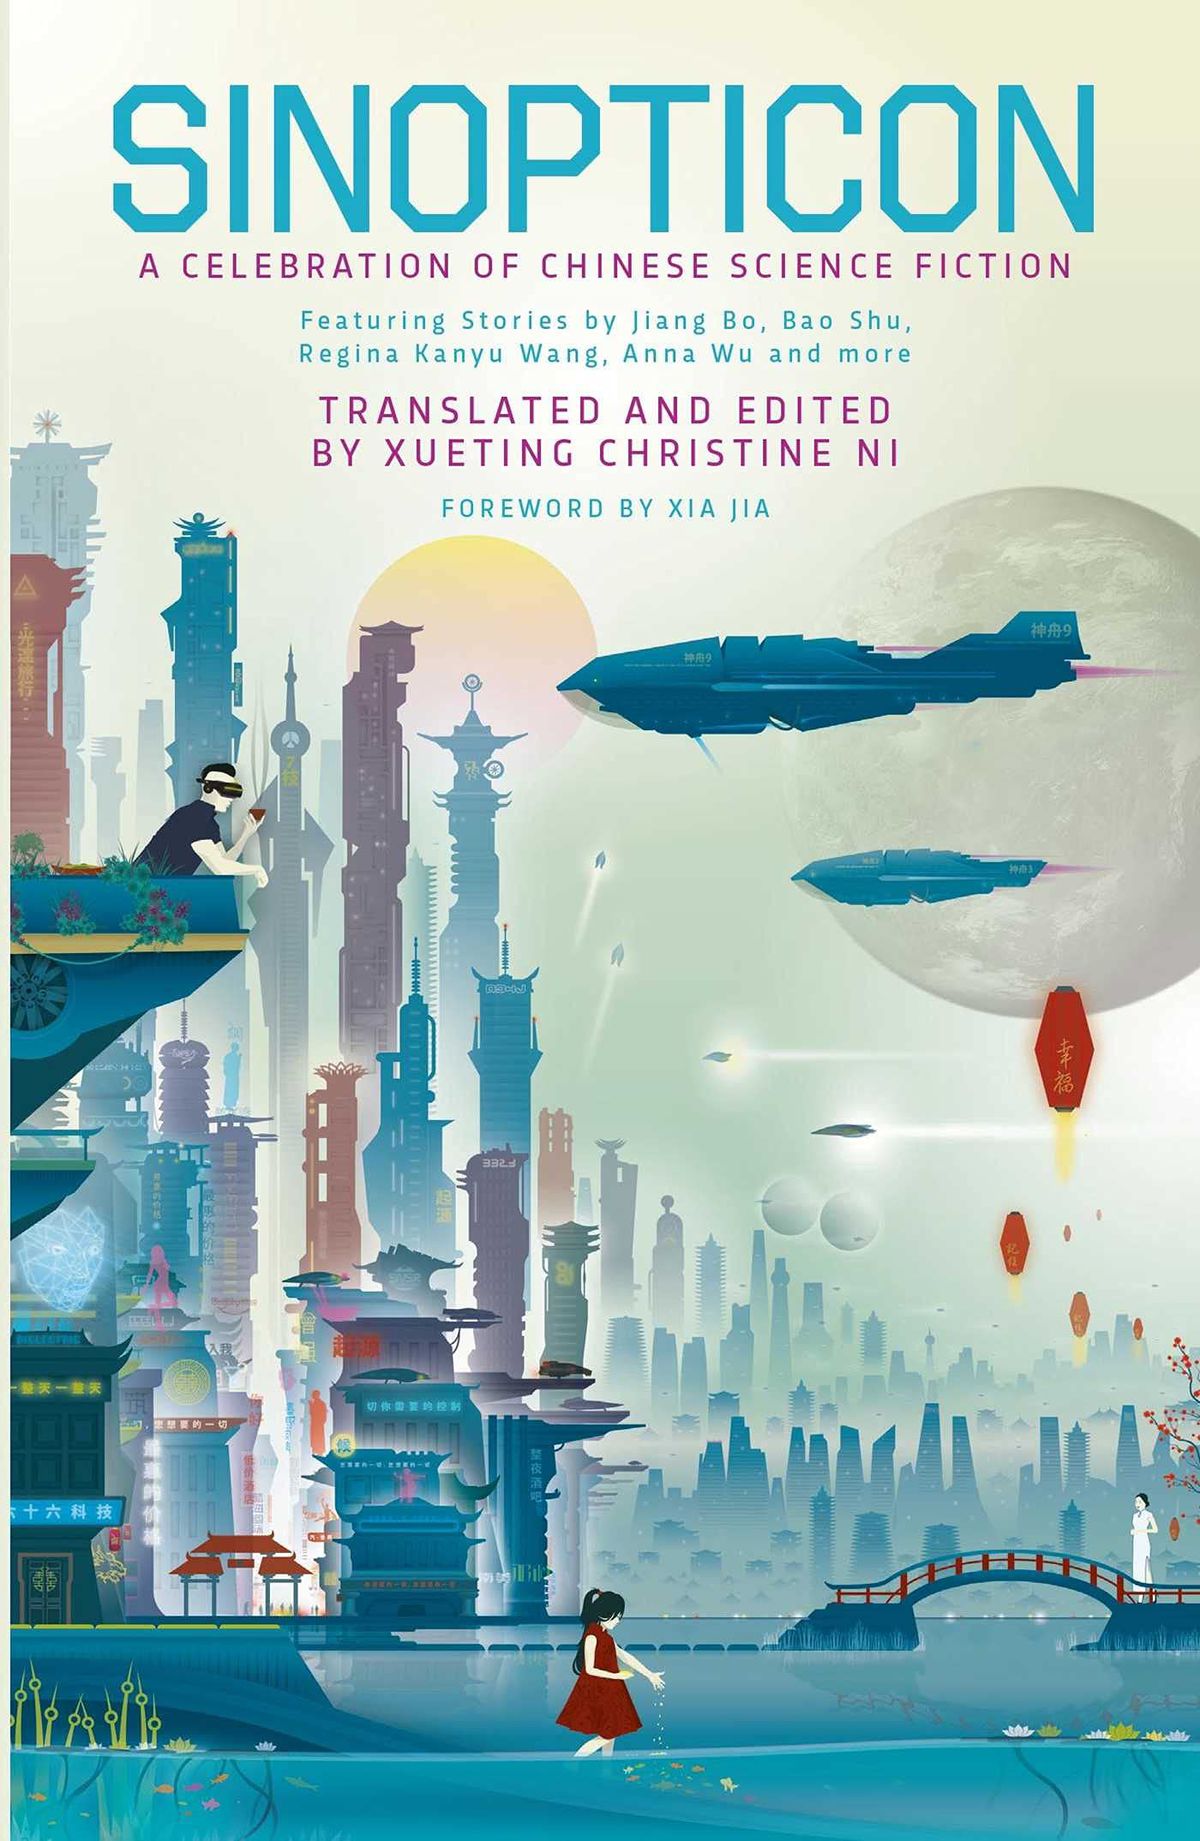 Sinopticon: A Celebration of Chinese Science Fiction book cover with a city surrounded by spaceships